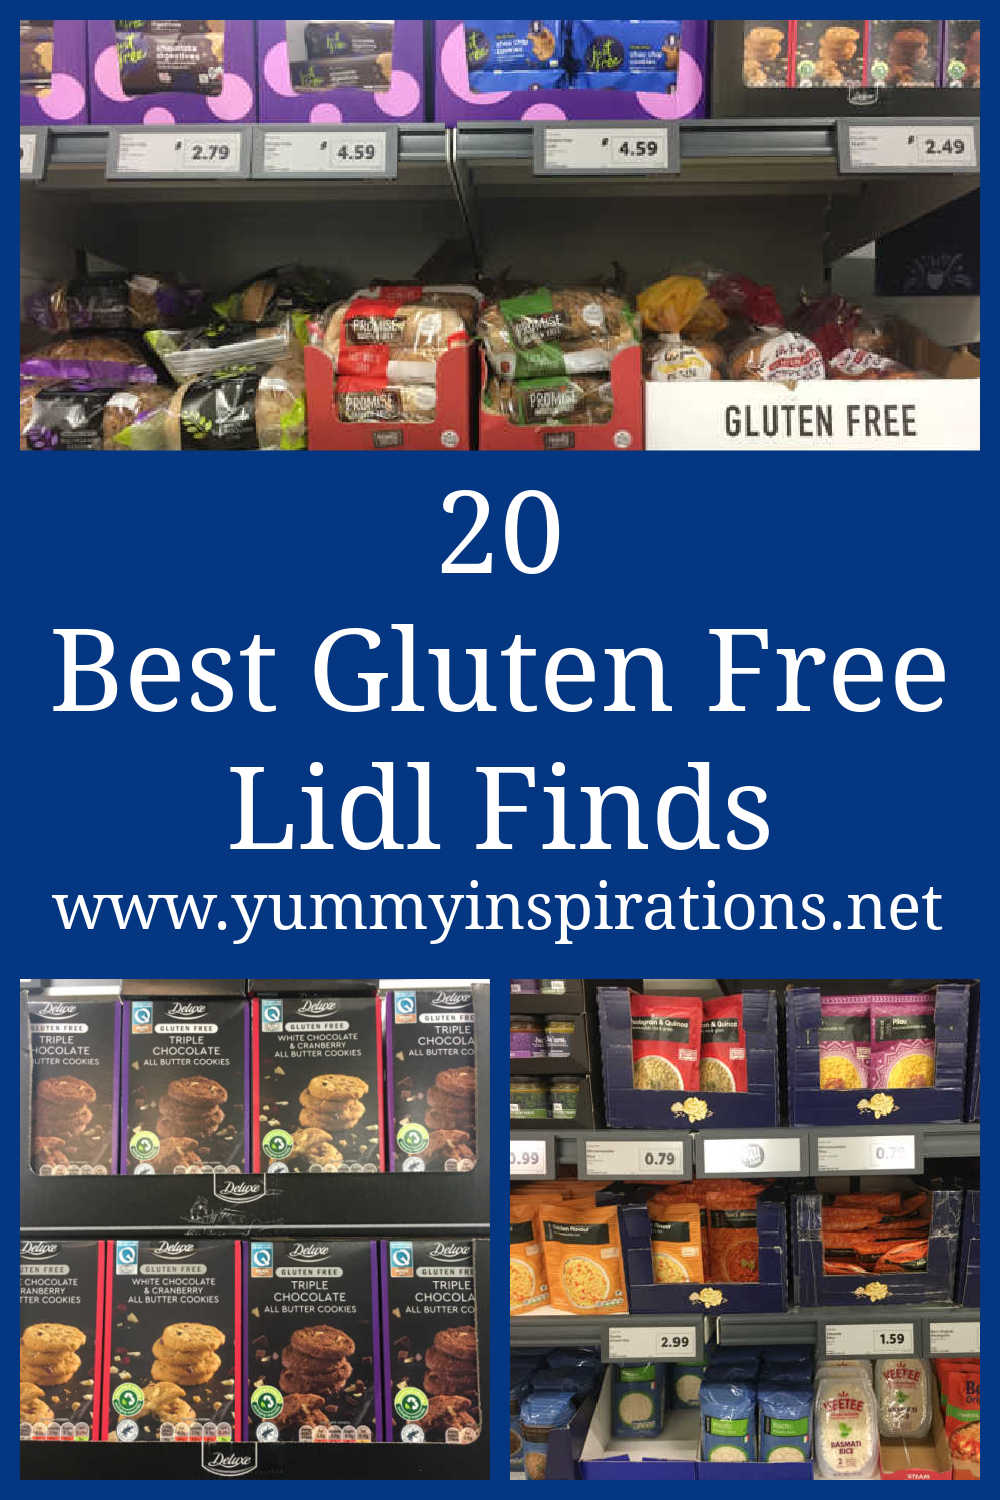 20 Lidl Gluten Free Products - Best Gluten-Free Foods Range at low prices - with a video look around the accidentally gluten free items at my local Lidl store.